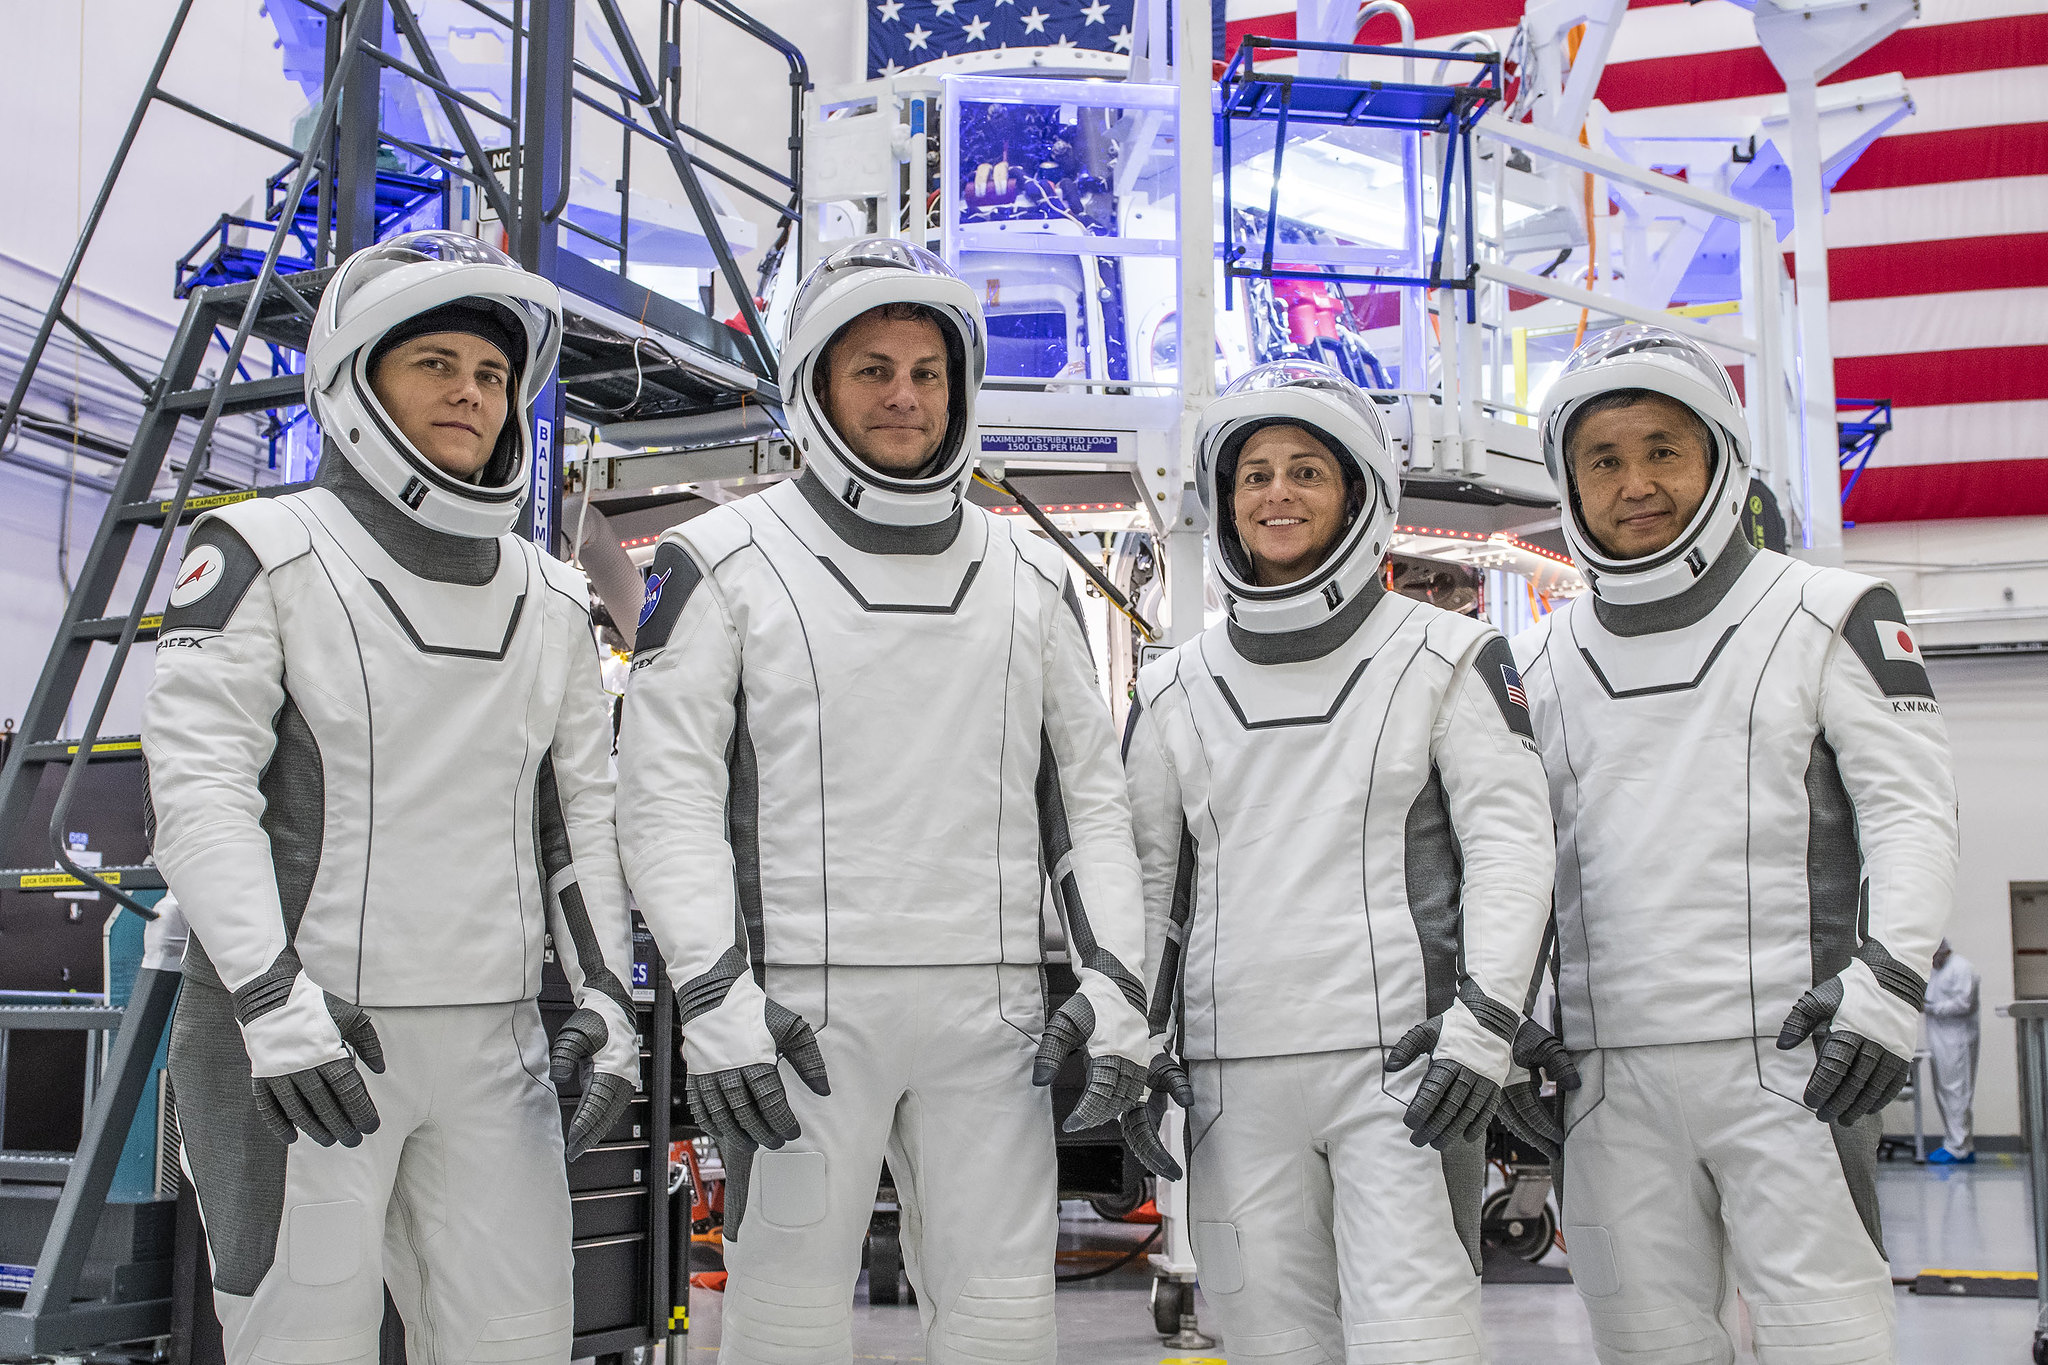 four astronauts in white spacesuits line up in front of space hardware